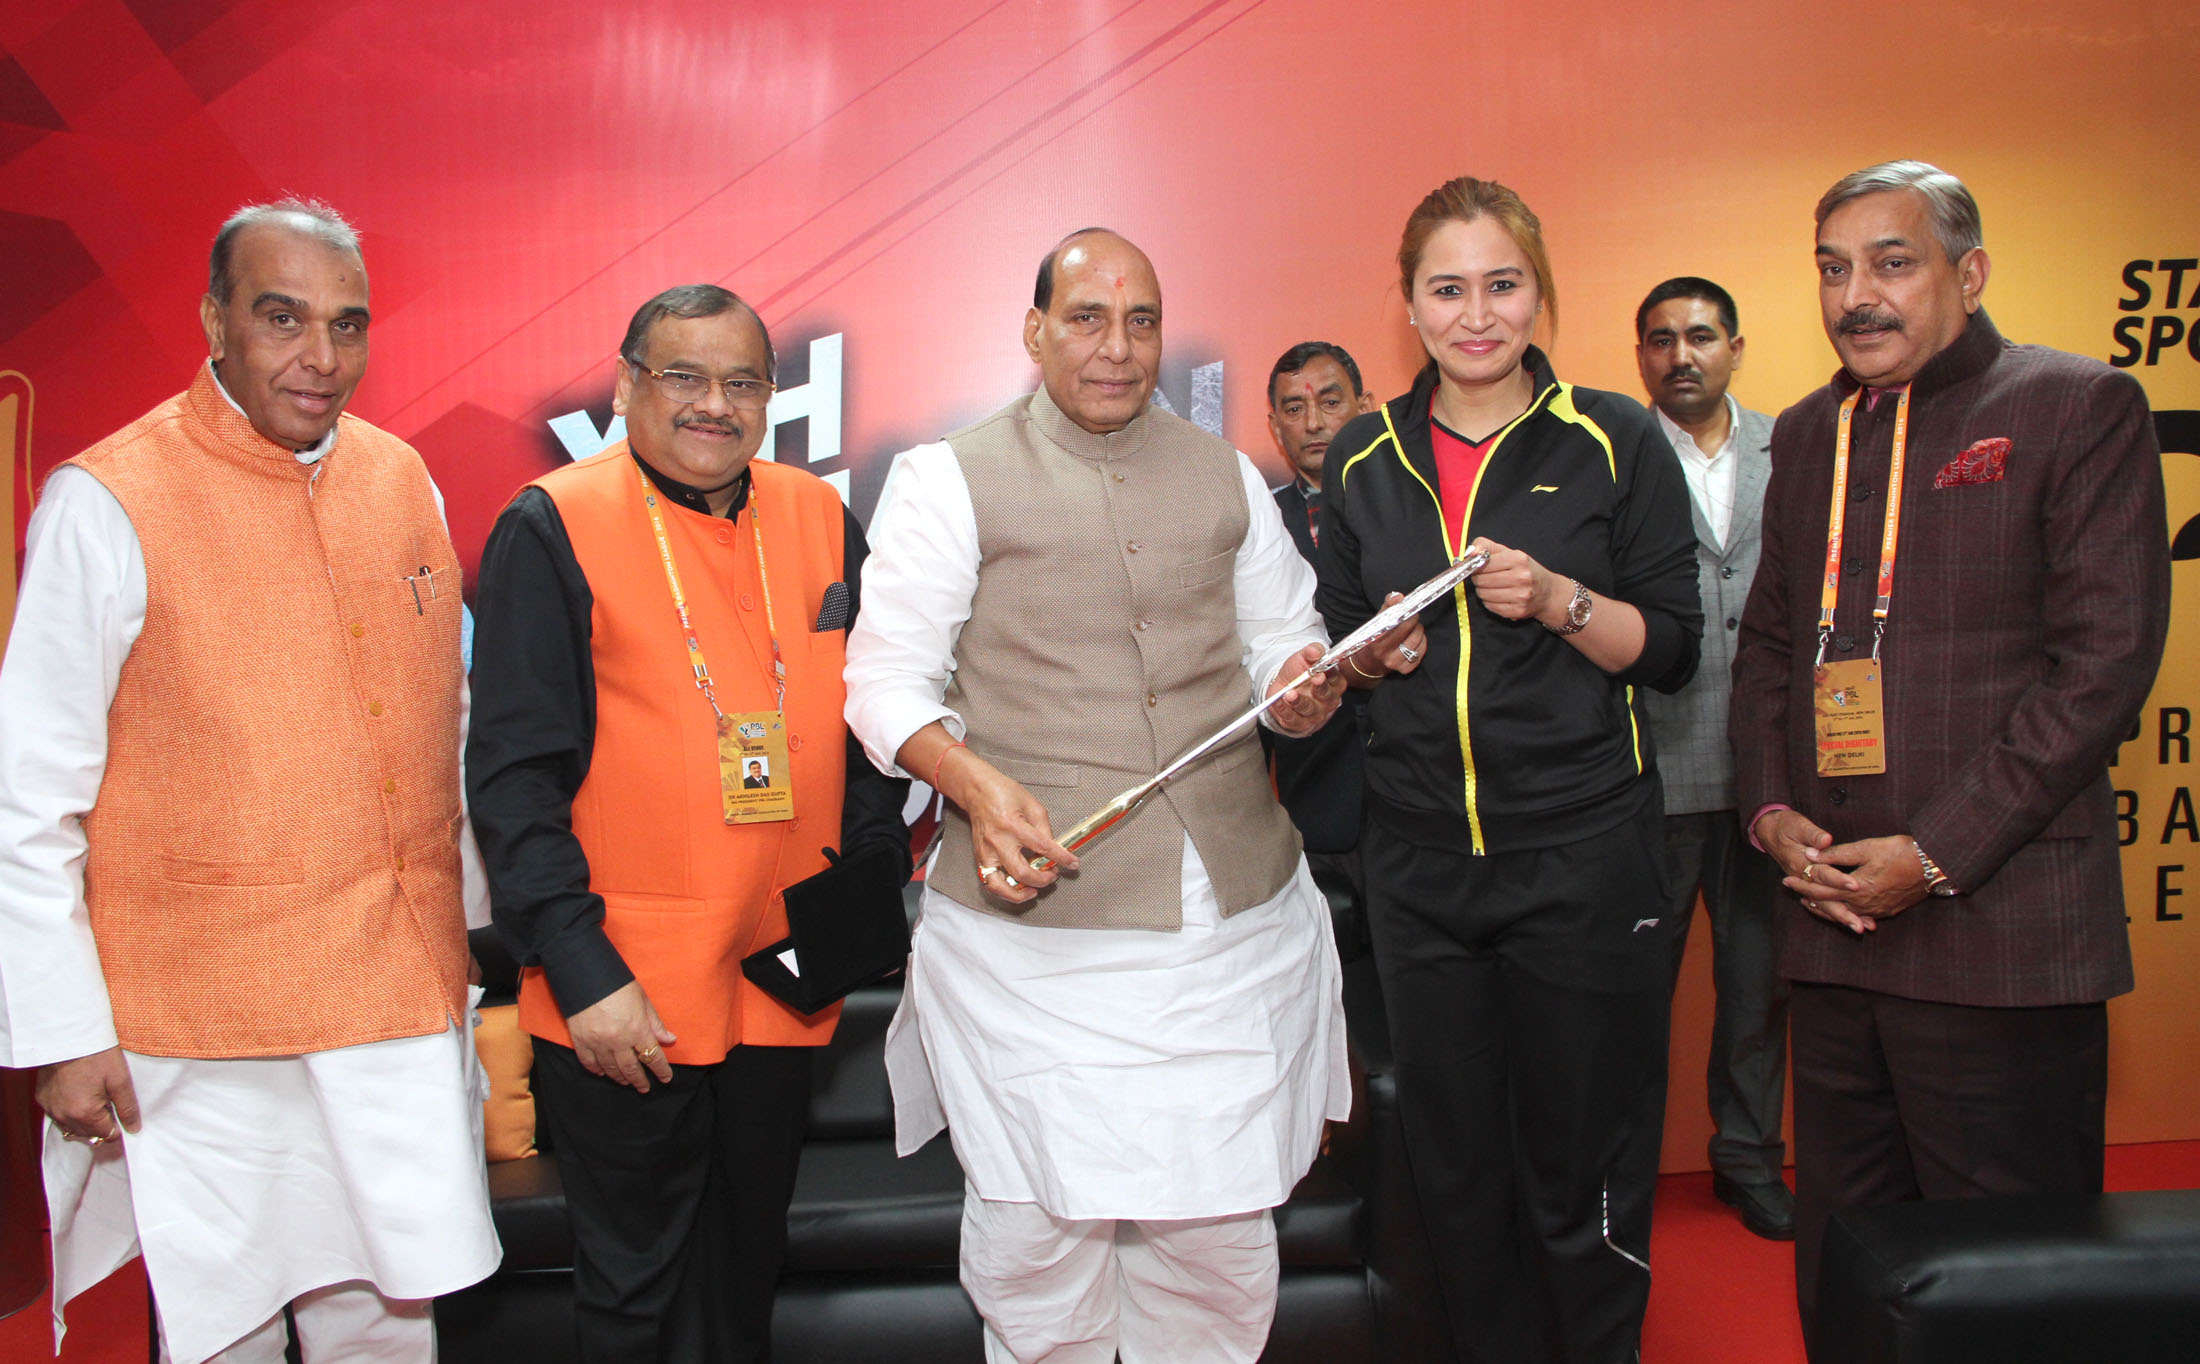 The Union Home Minister, Shri Rajnath Singh being presented the memento during the final day of the Premier Badminton League, in New Delhi on January 17, 2016.